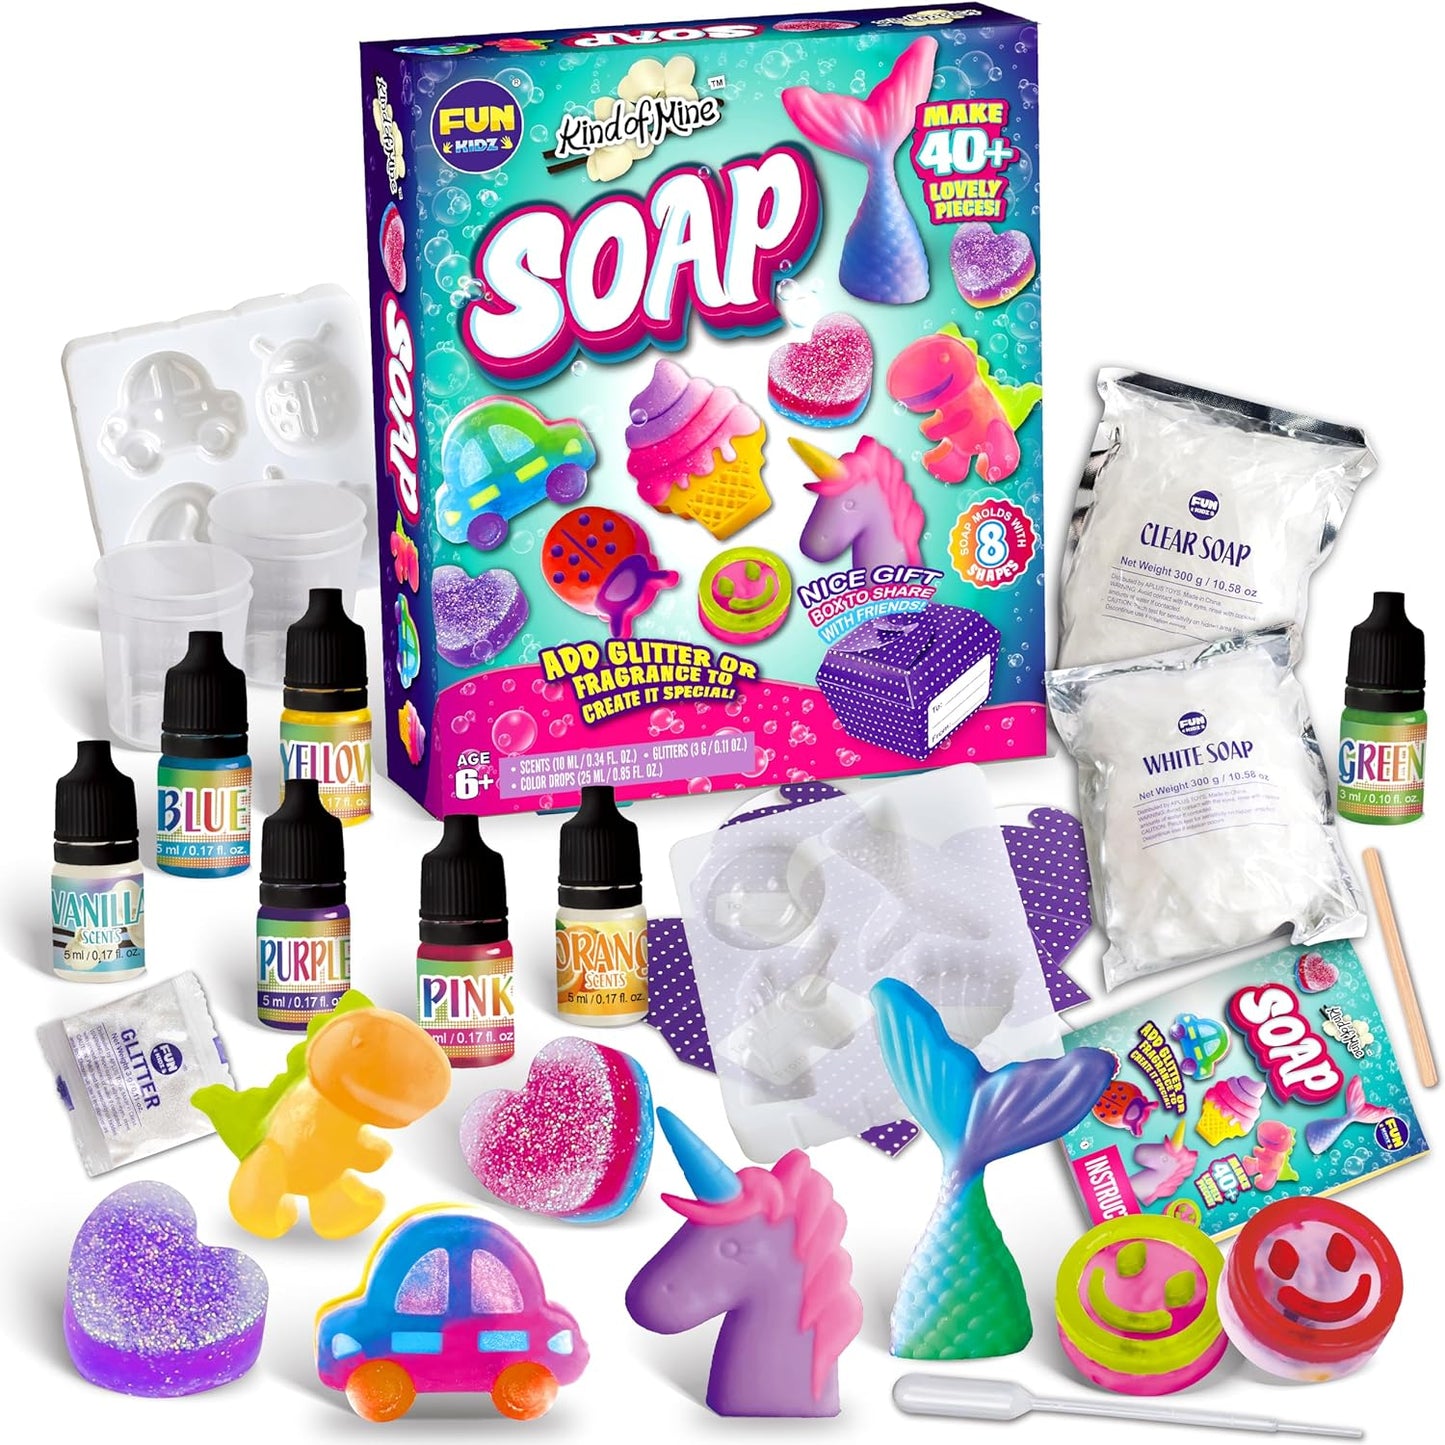 Kids Soap Kit, Funkidz Soap Making Kit for Kids All Ages DIY Crafts Kits STEM Science Activity Gift for Girls and Boys